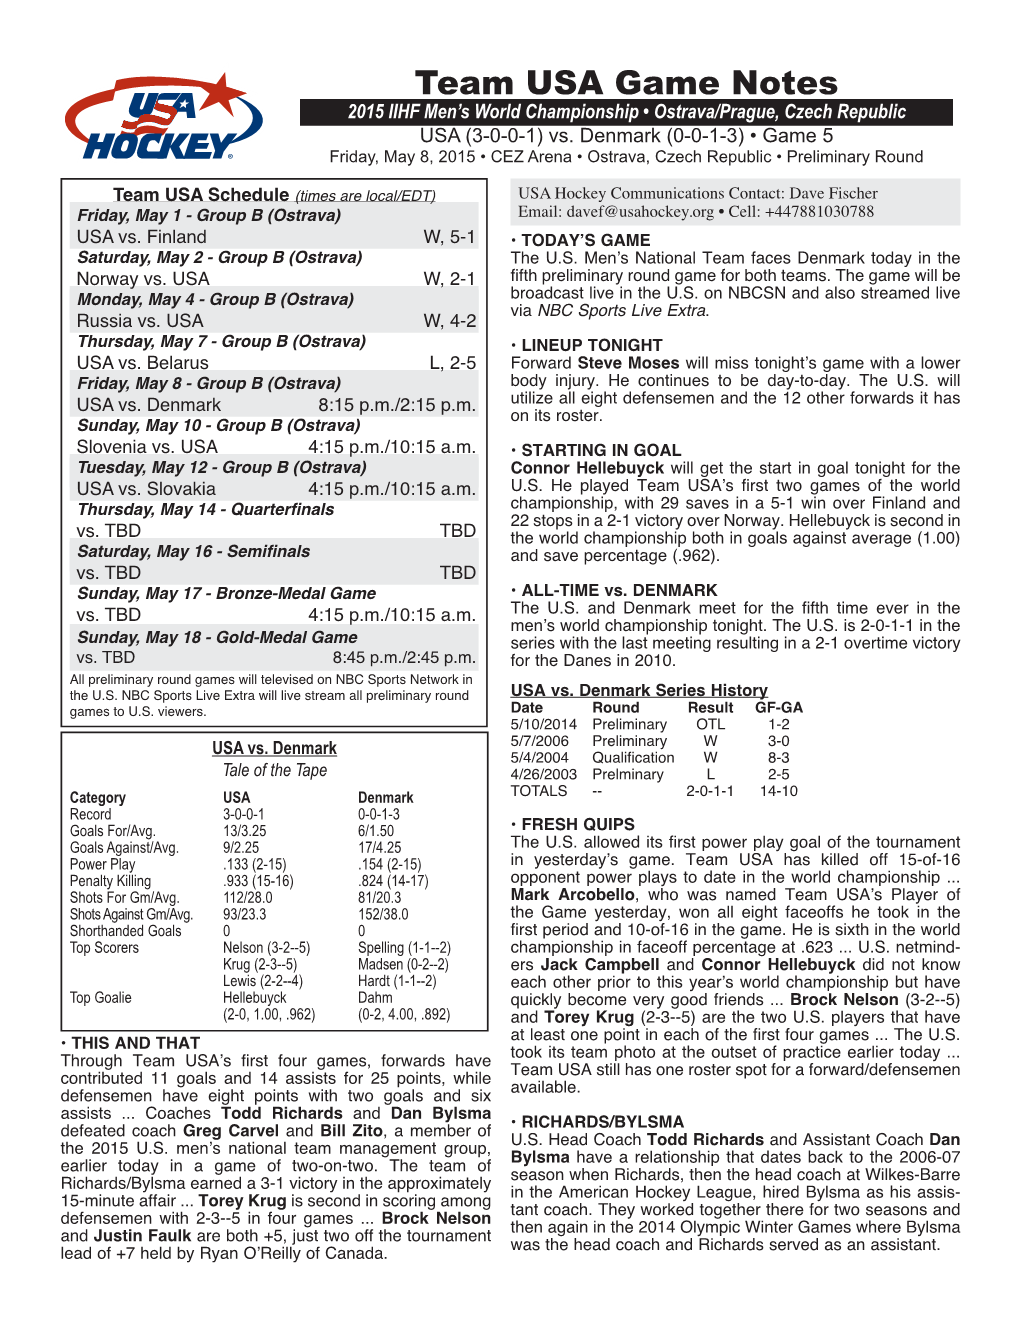 Game Notes Vs. Denmark • Friday, May 8, 2015 • 2015 IIHF Men’S World Championship • Page Two